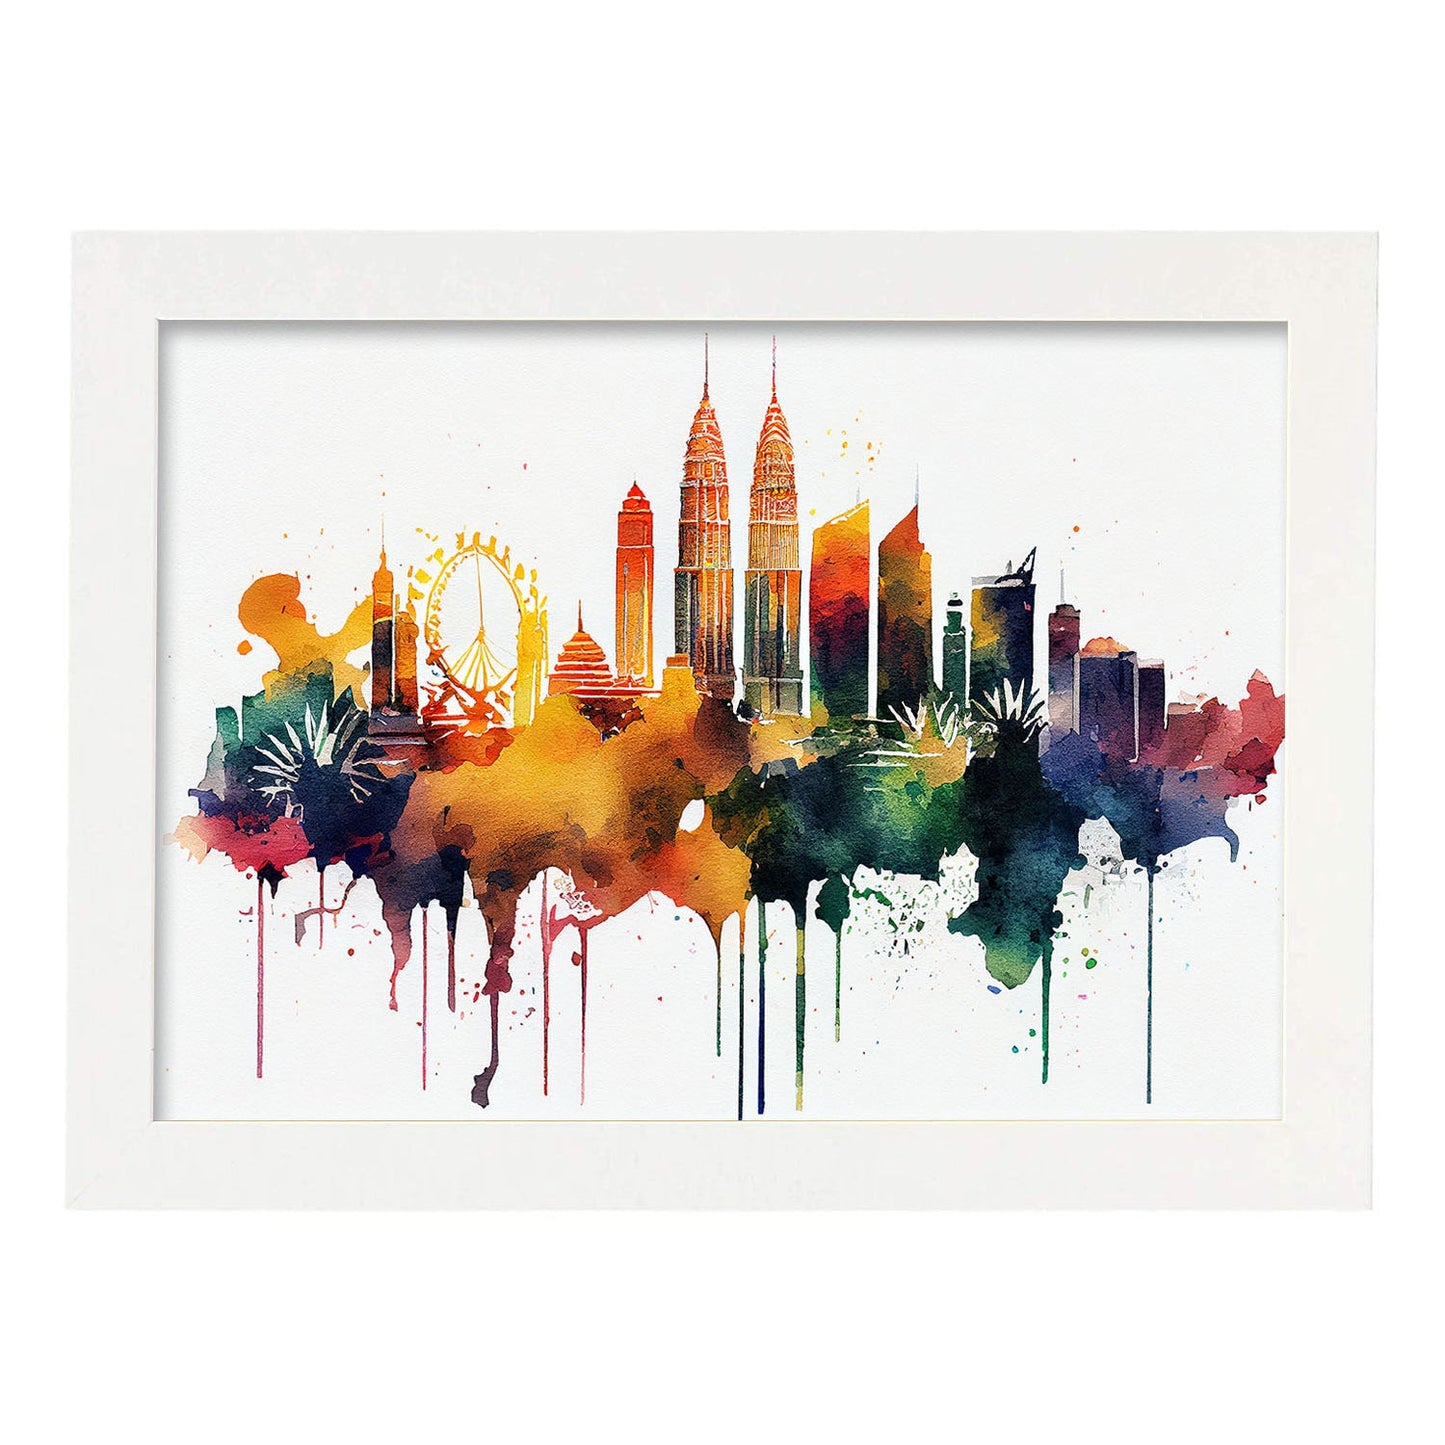 Nacnic watercolor of a skyline of the city of Kuala Lumpur_4. Aesthetic Wall Art Prints for Bedroom or Living Room Design.-Artwork-Nacnic-A4-Marco Blanco-Nacnic Estudio SL